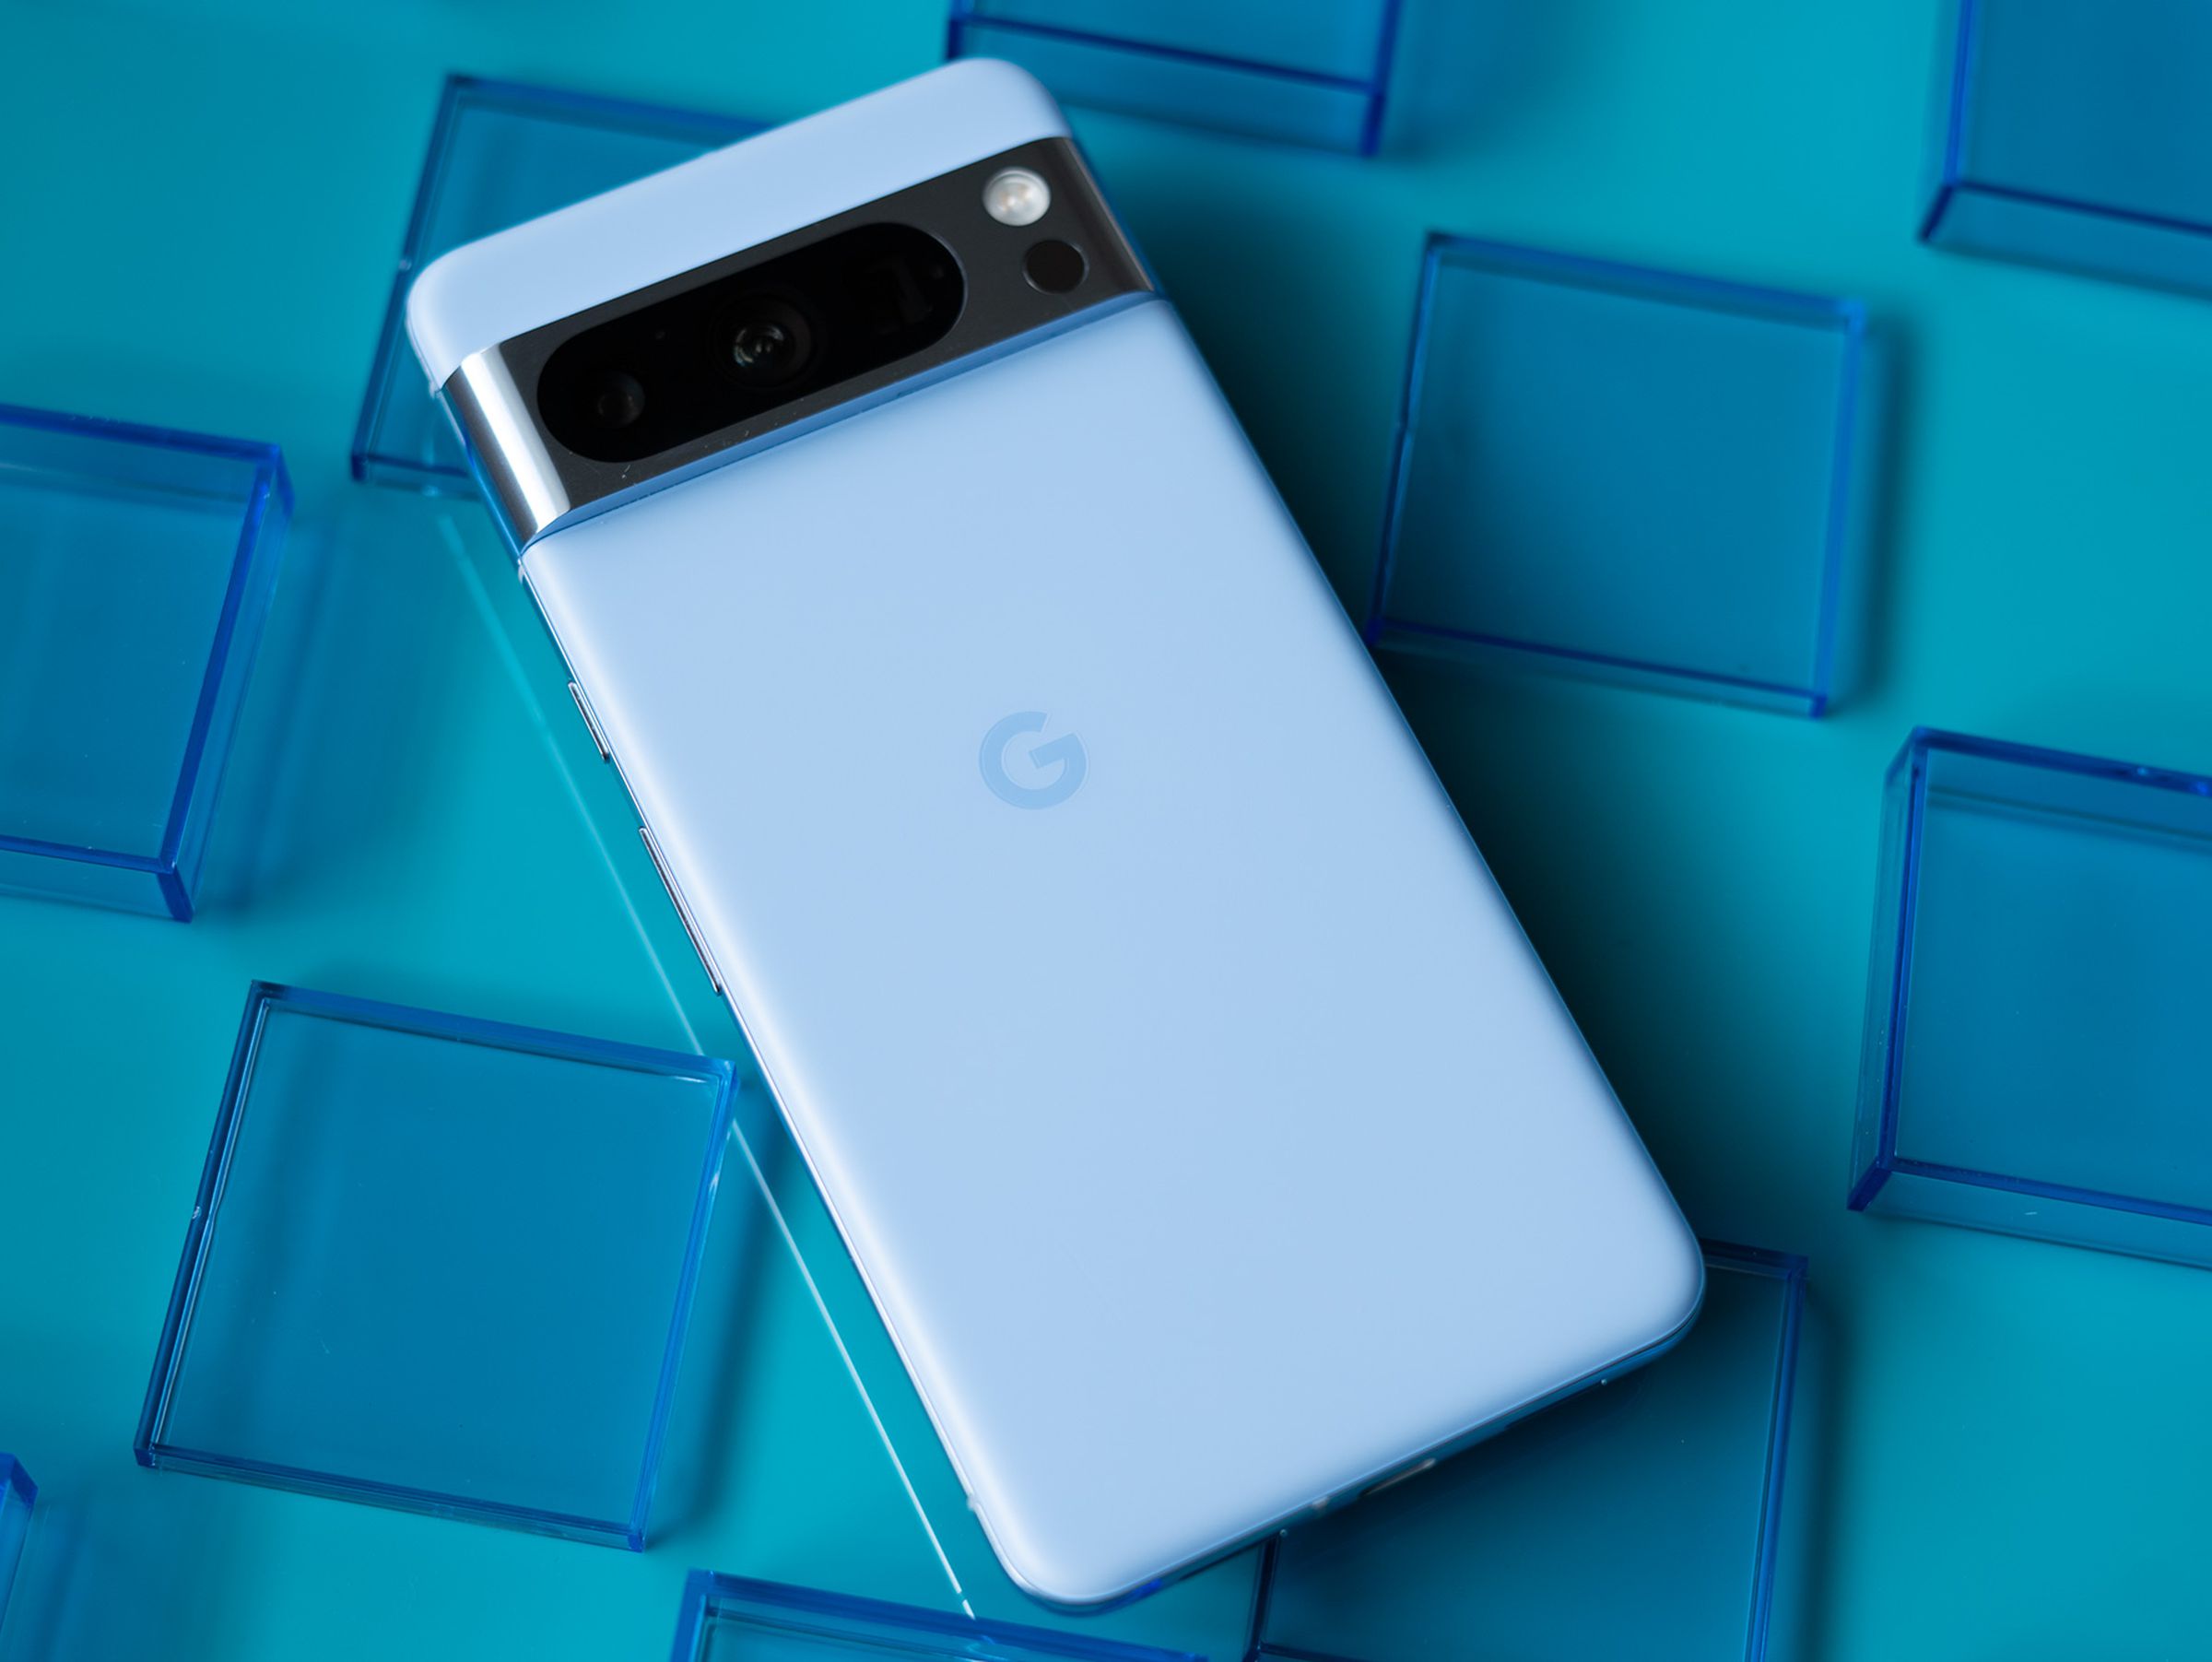 Google Pixel 8 Pro in bay blue showing back panel on a teal blue background surrounded by transparent blue squares